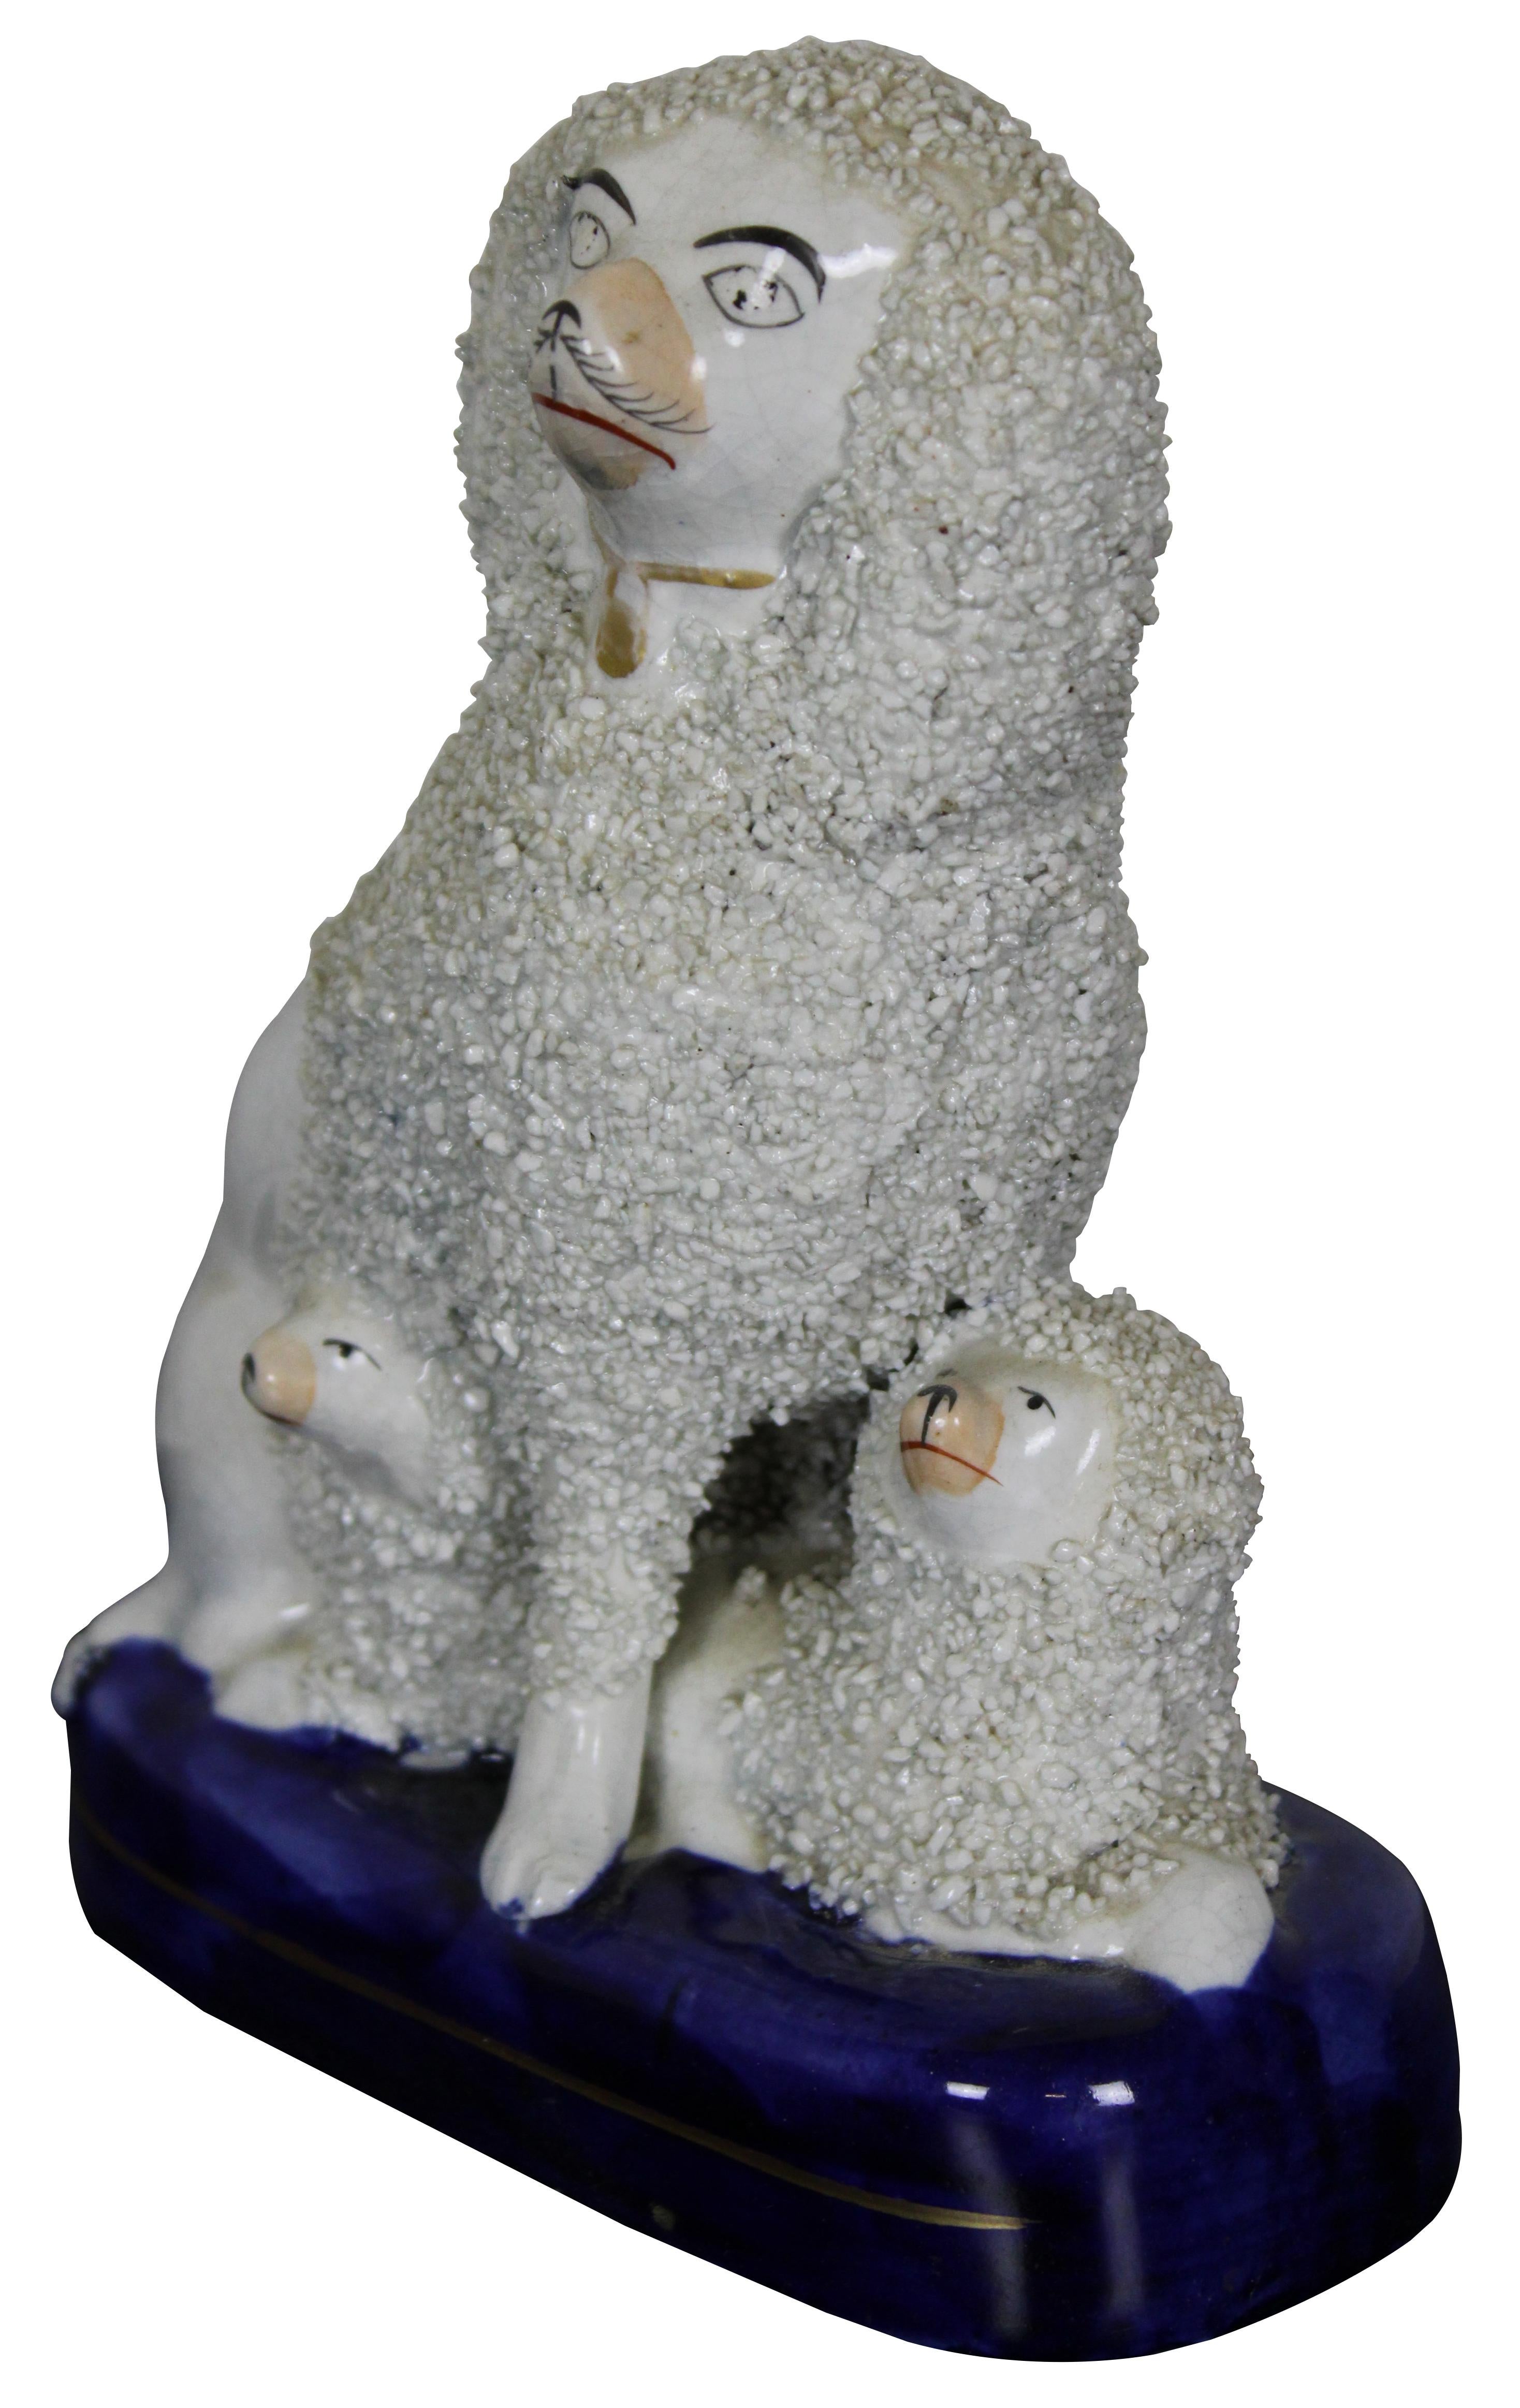 Antique mid 19th century Staffordshire porcelain trio figurine of a white Spaniel or Poodle and two puppies, seated on a cobalt blue base with textured confetti design. Measure: 7